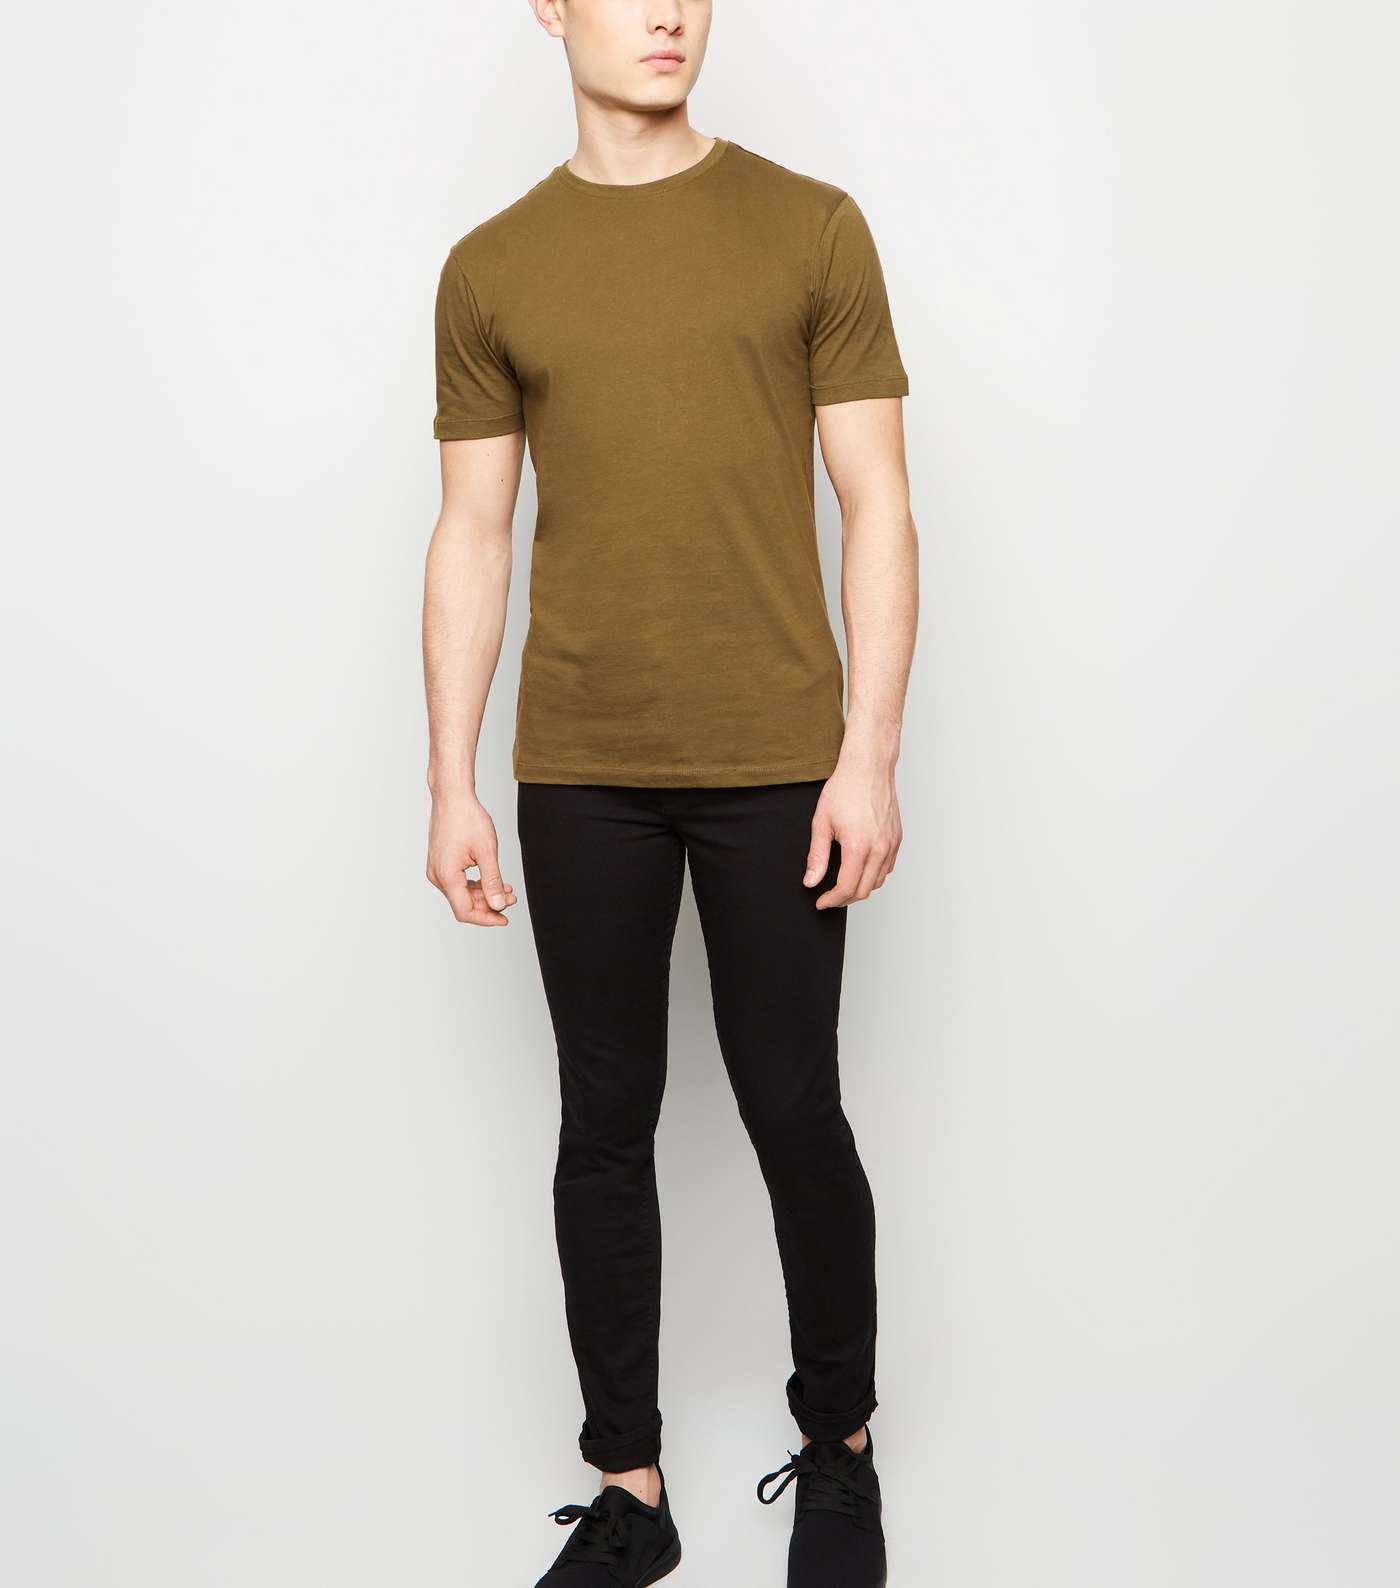 2 Pack Khaki and Black Muscle Fit T-Shirt Image 2